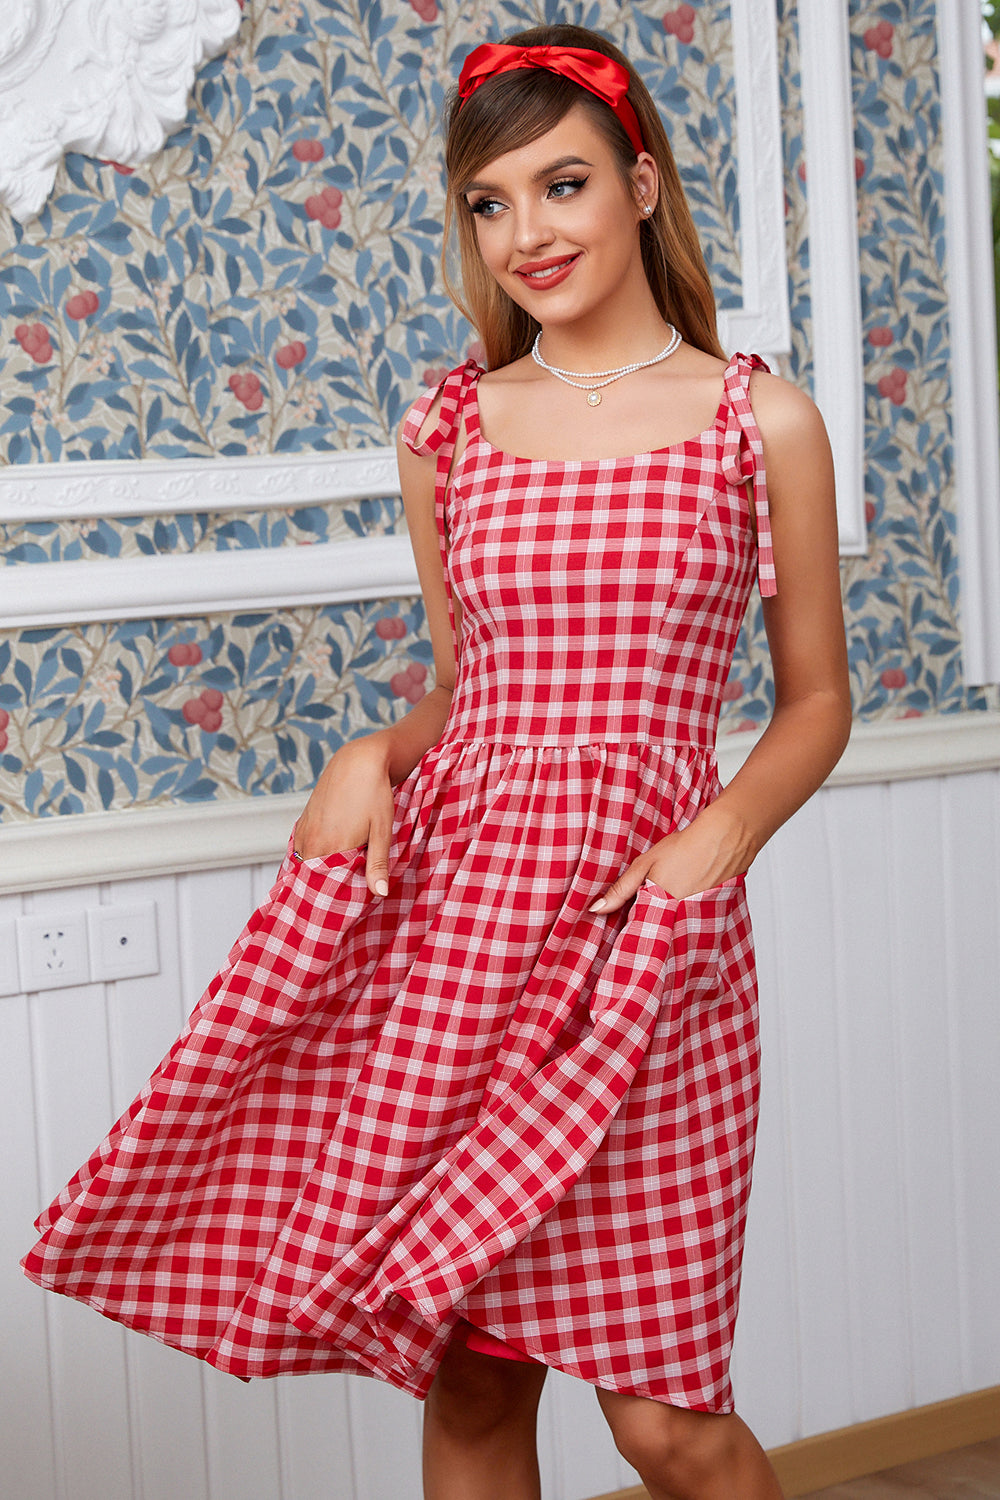 Red Plaid Vintage Dress with Bows